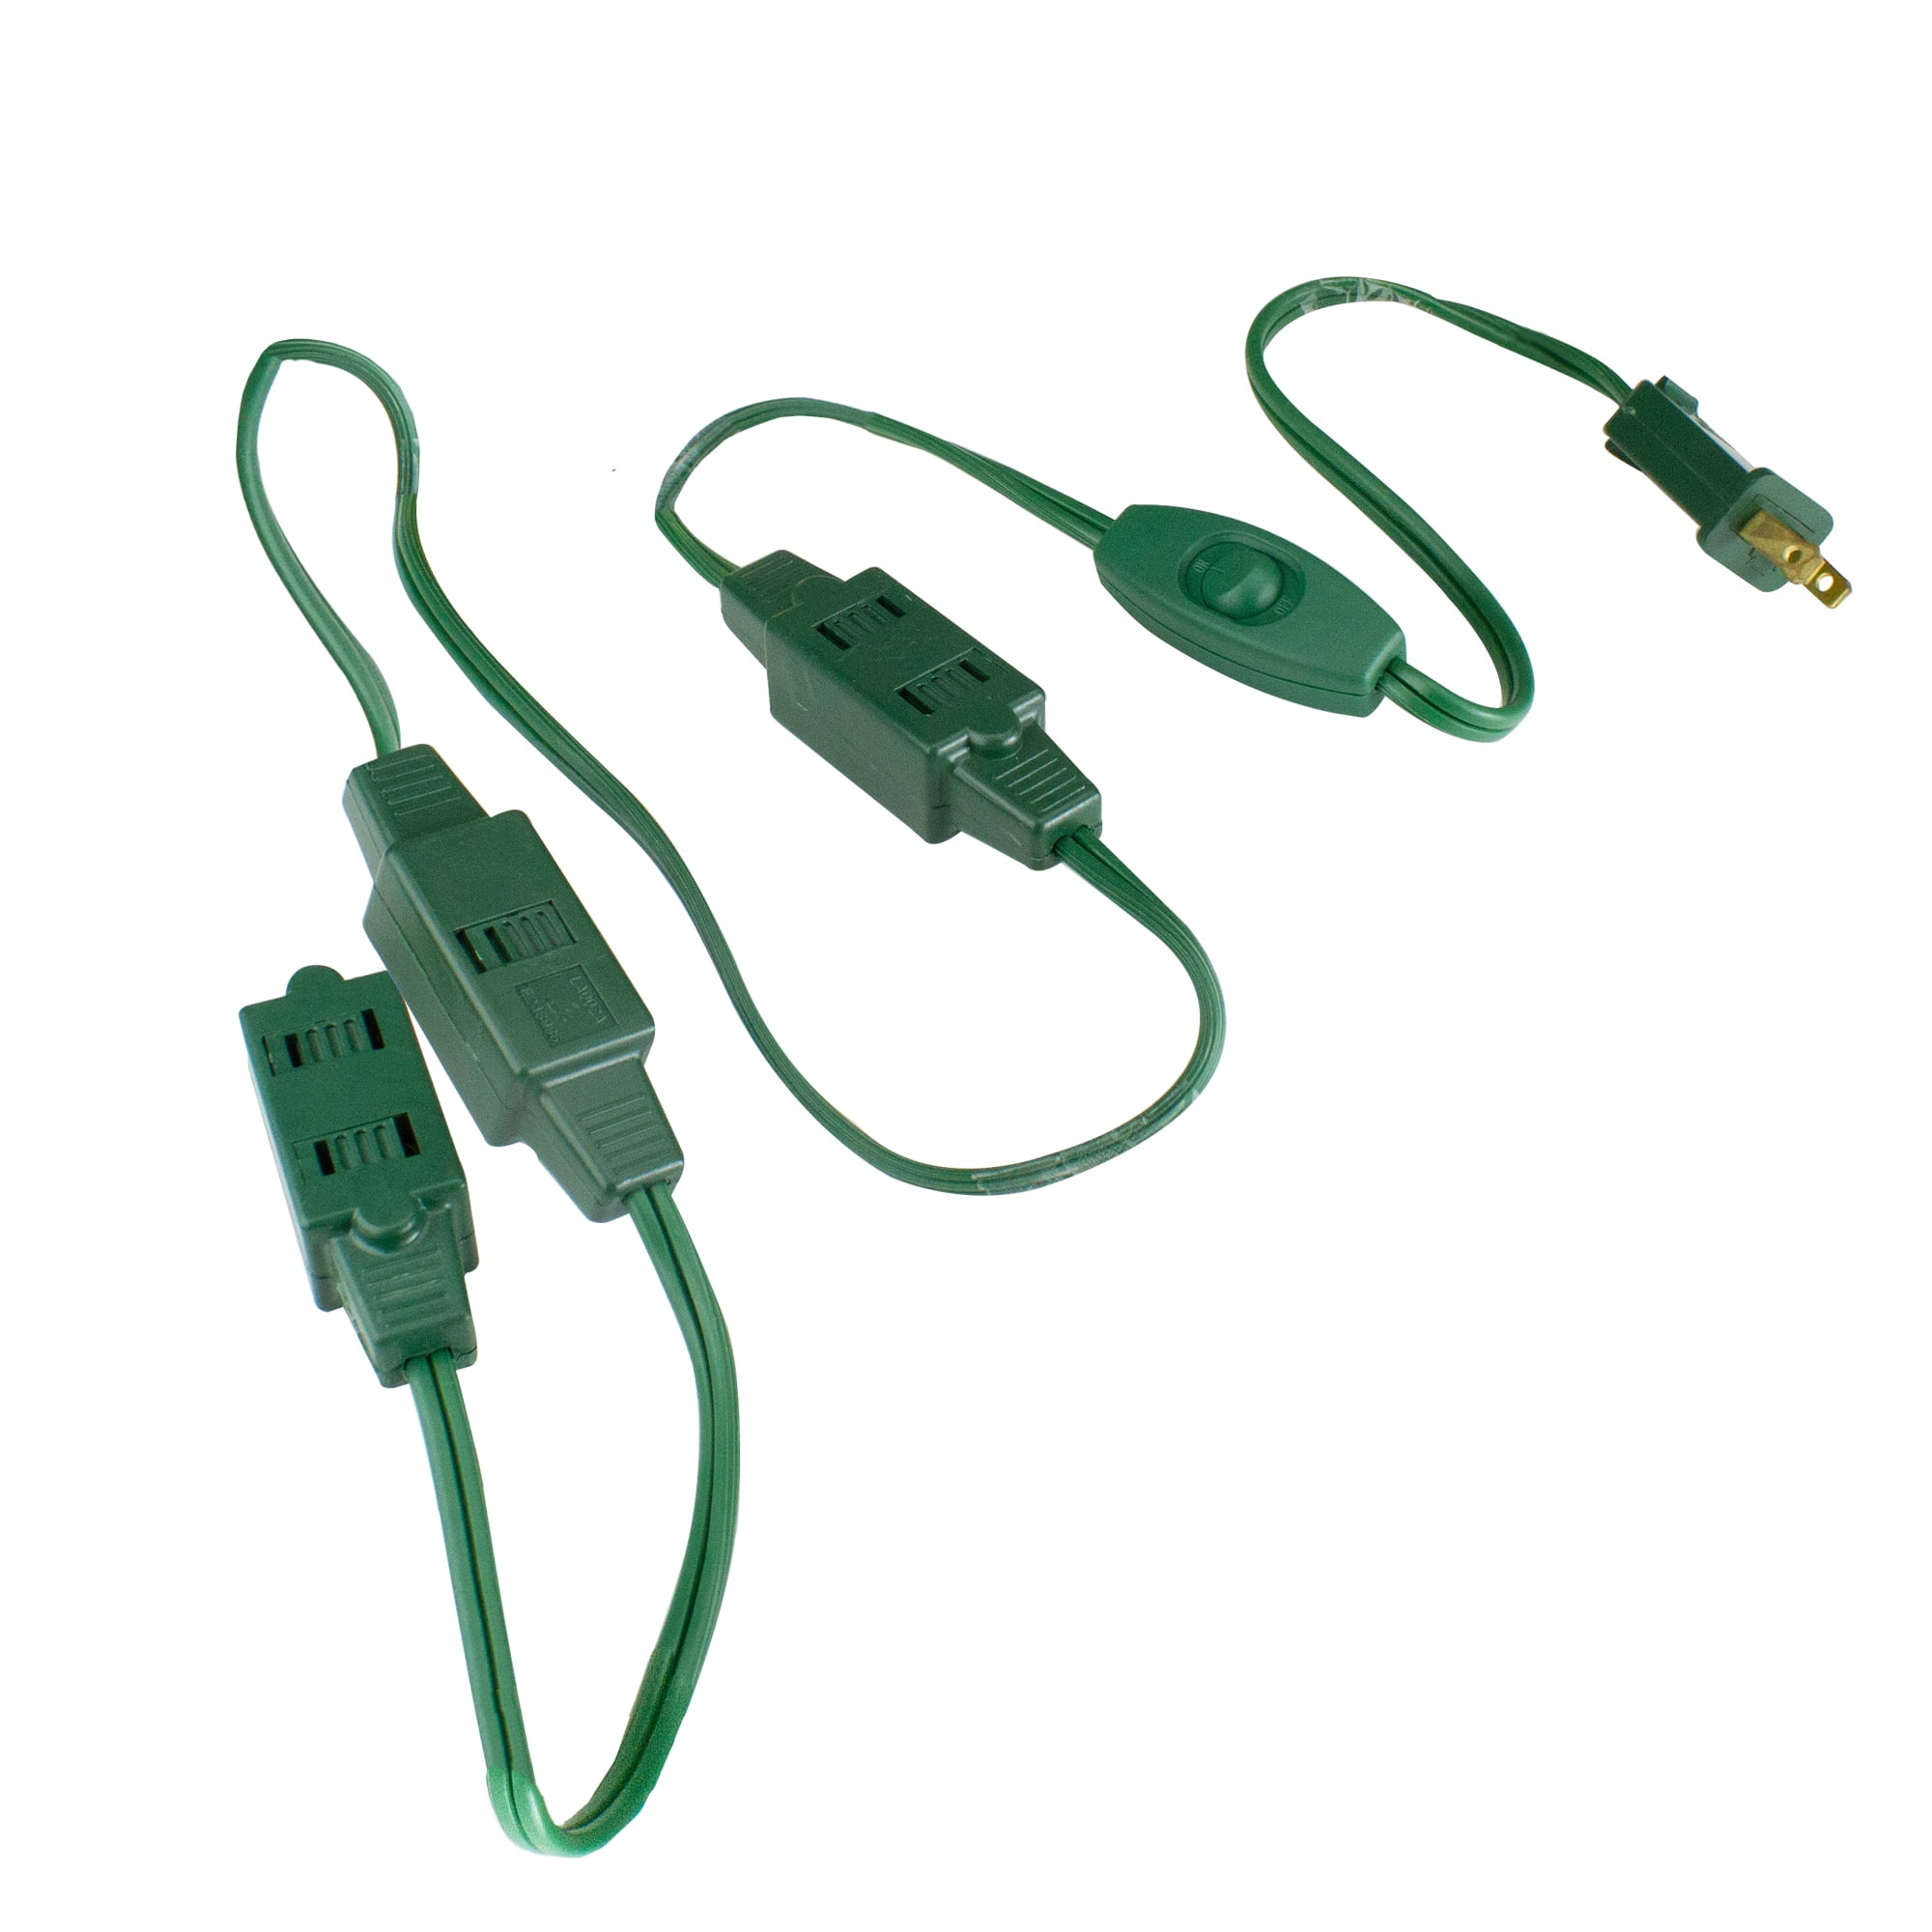 15 Ft, Green Coleman Cable 2189 Woods Extension Cord For Christmas Or Holiday Lights With 9 Outlets For Indoors